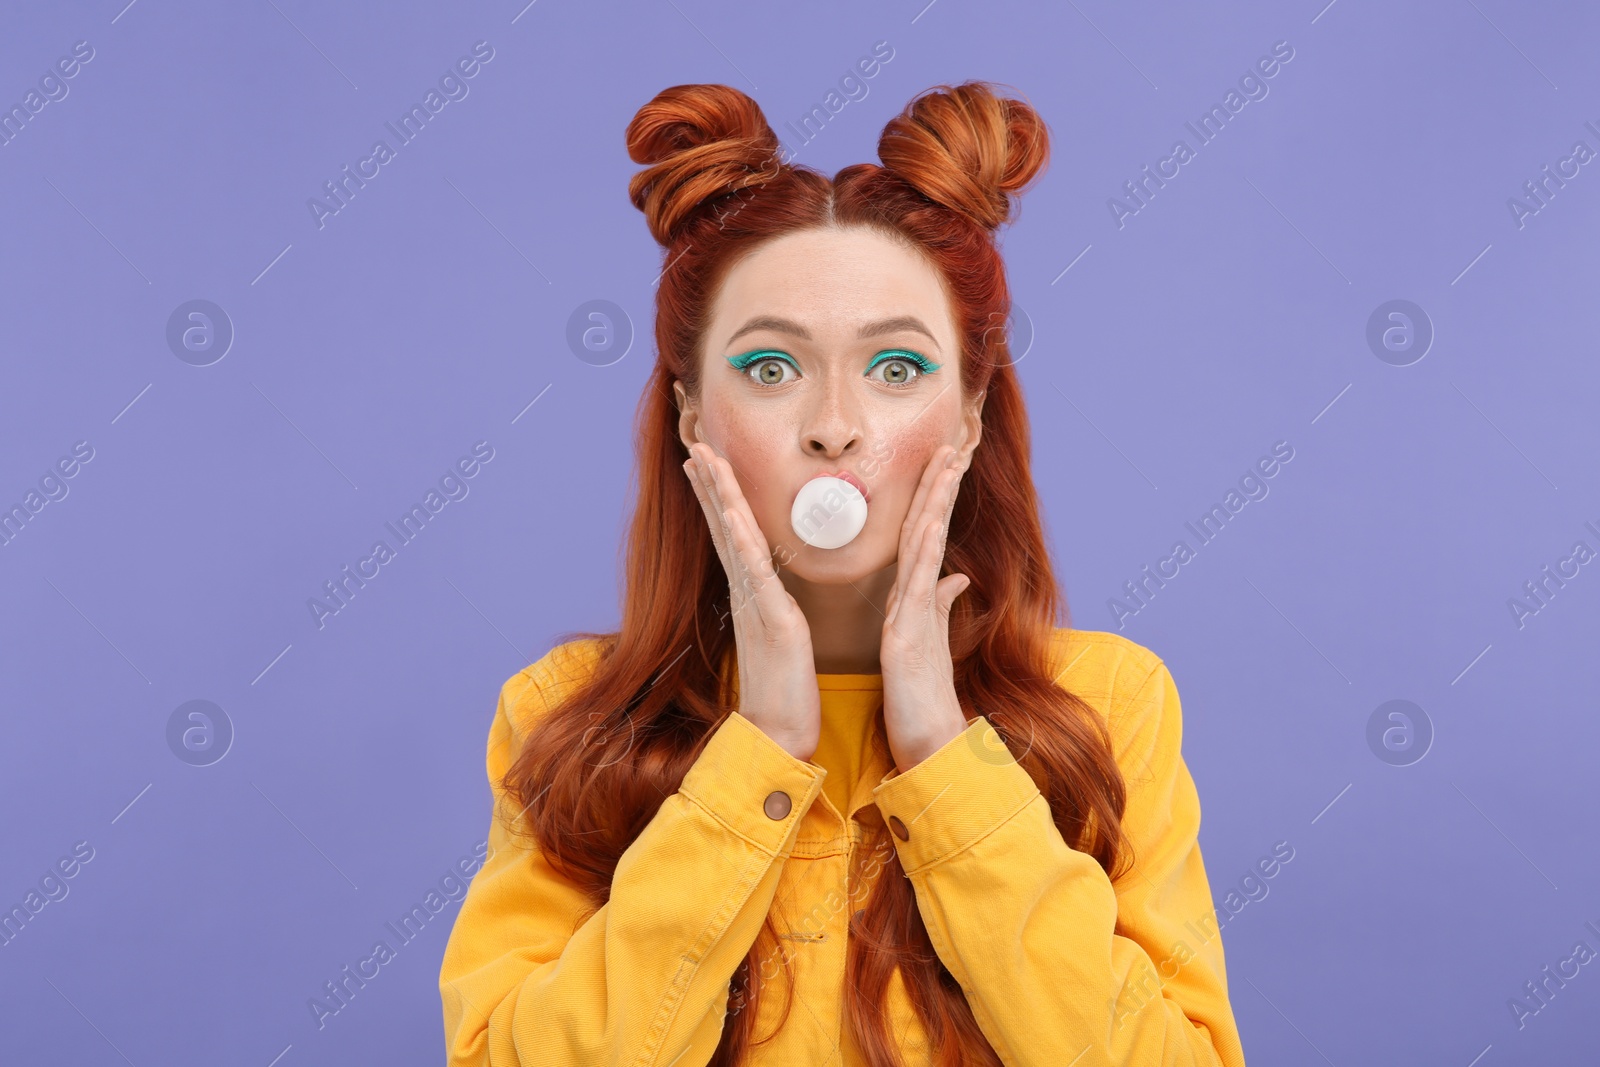 Photo of Portrait of surprised woman with bright makeup blowing bubble gum on violet background